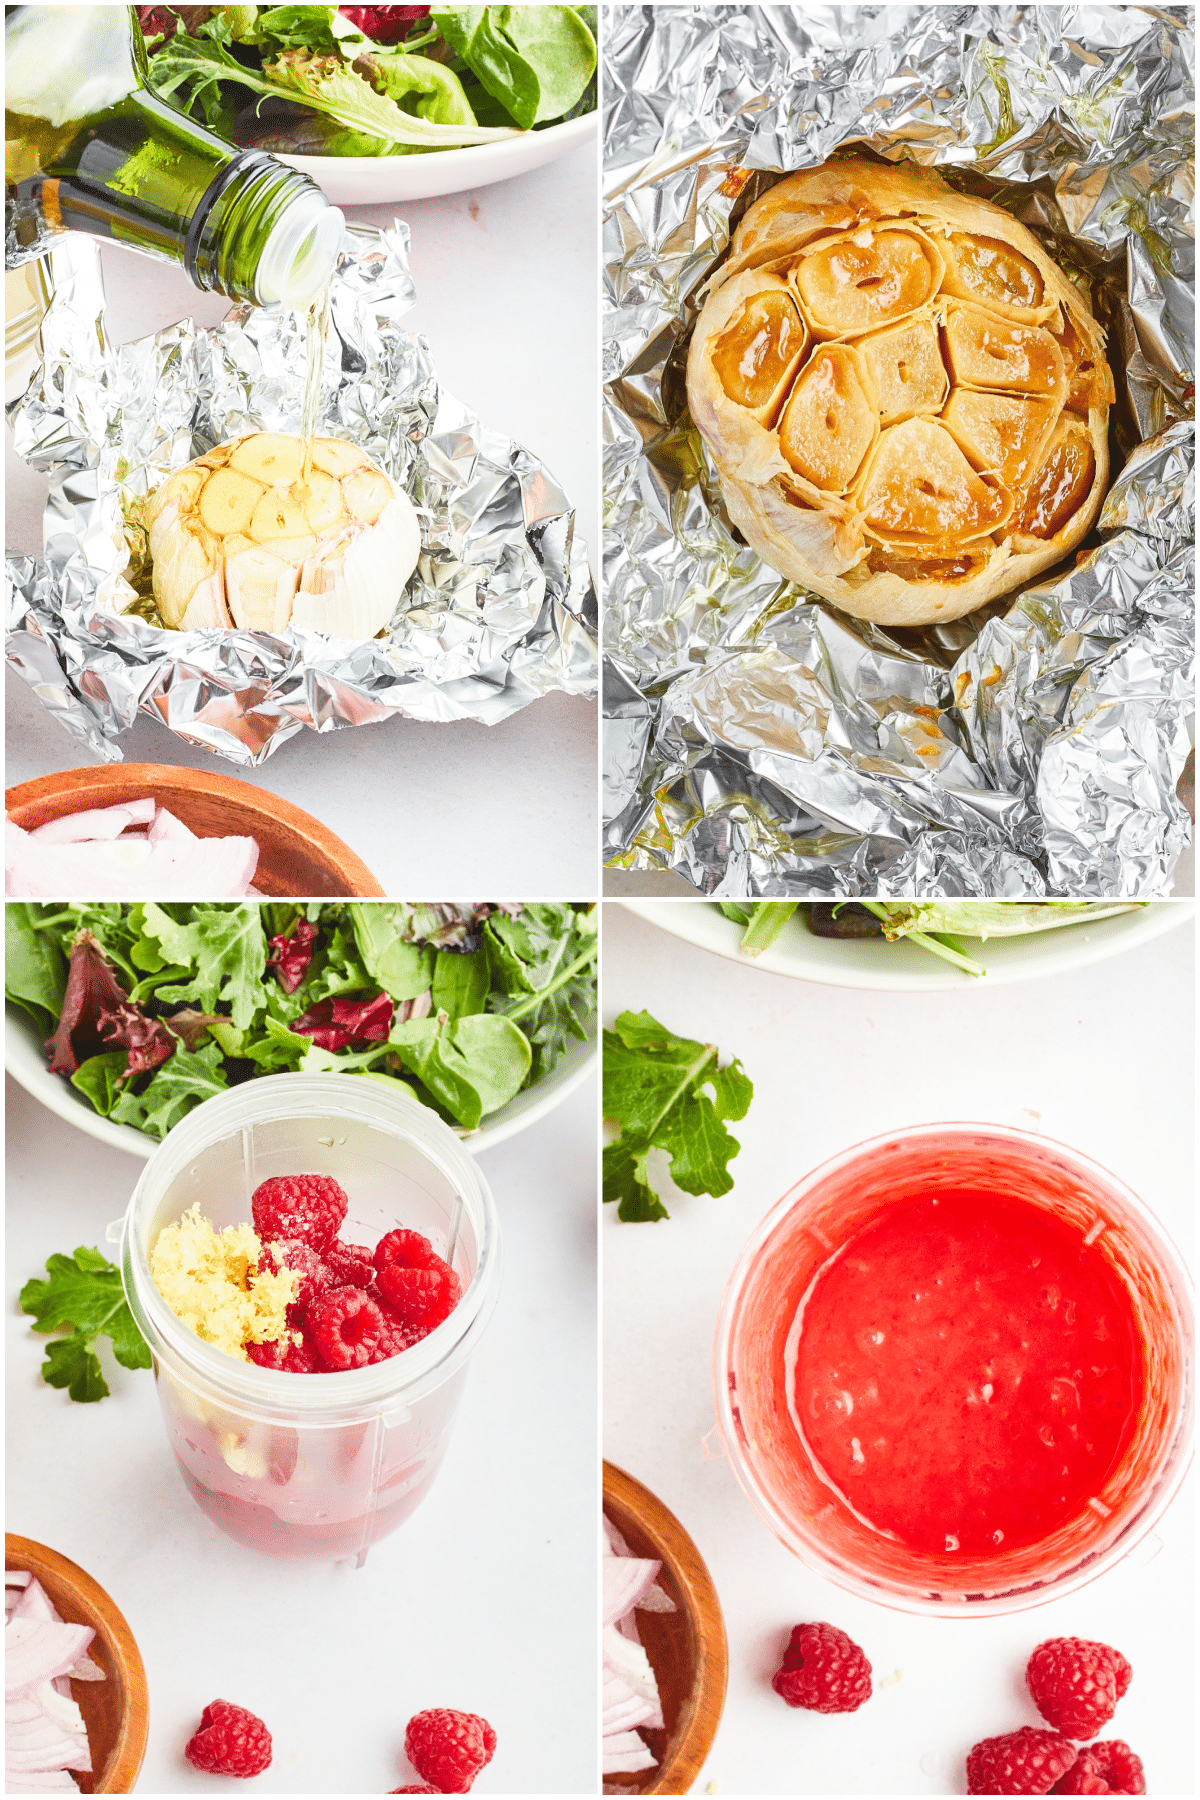 A four image collage shows how to roast garlic and make a raspberry vinaigrette: slice the top from a garlic bulb, drizzle with olive oil, wrap it in foil and roast. Add all of the vinaigrette ingredients to a small blender and blend to a bright red dressing.